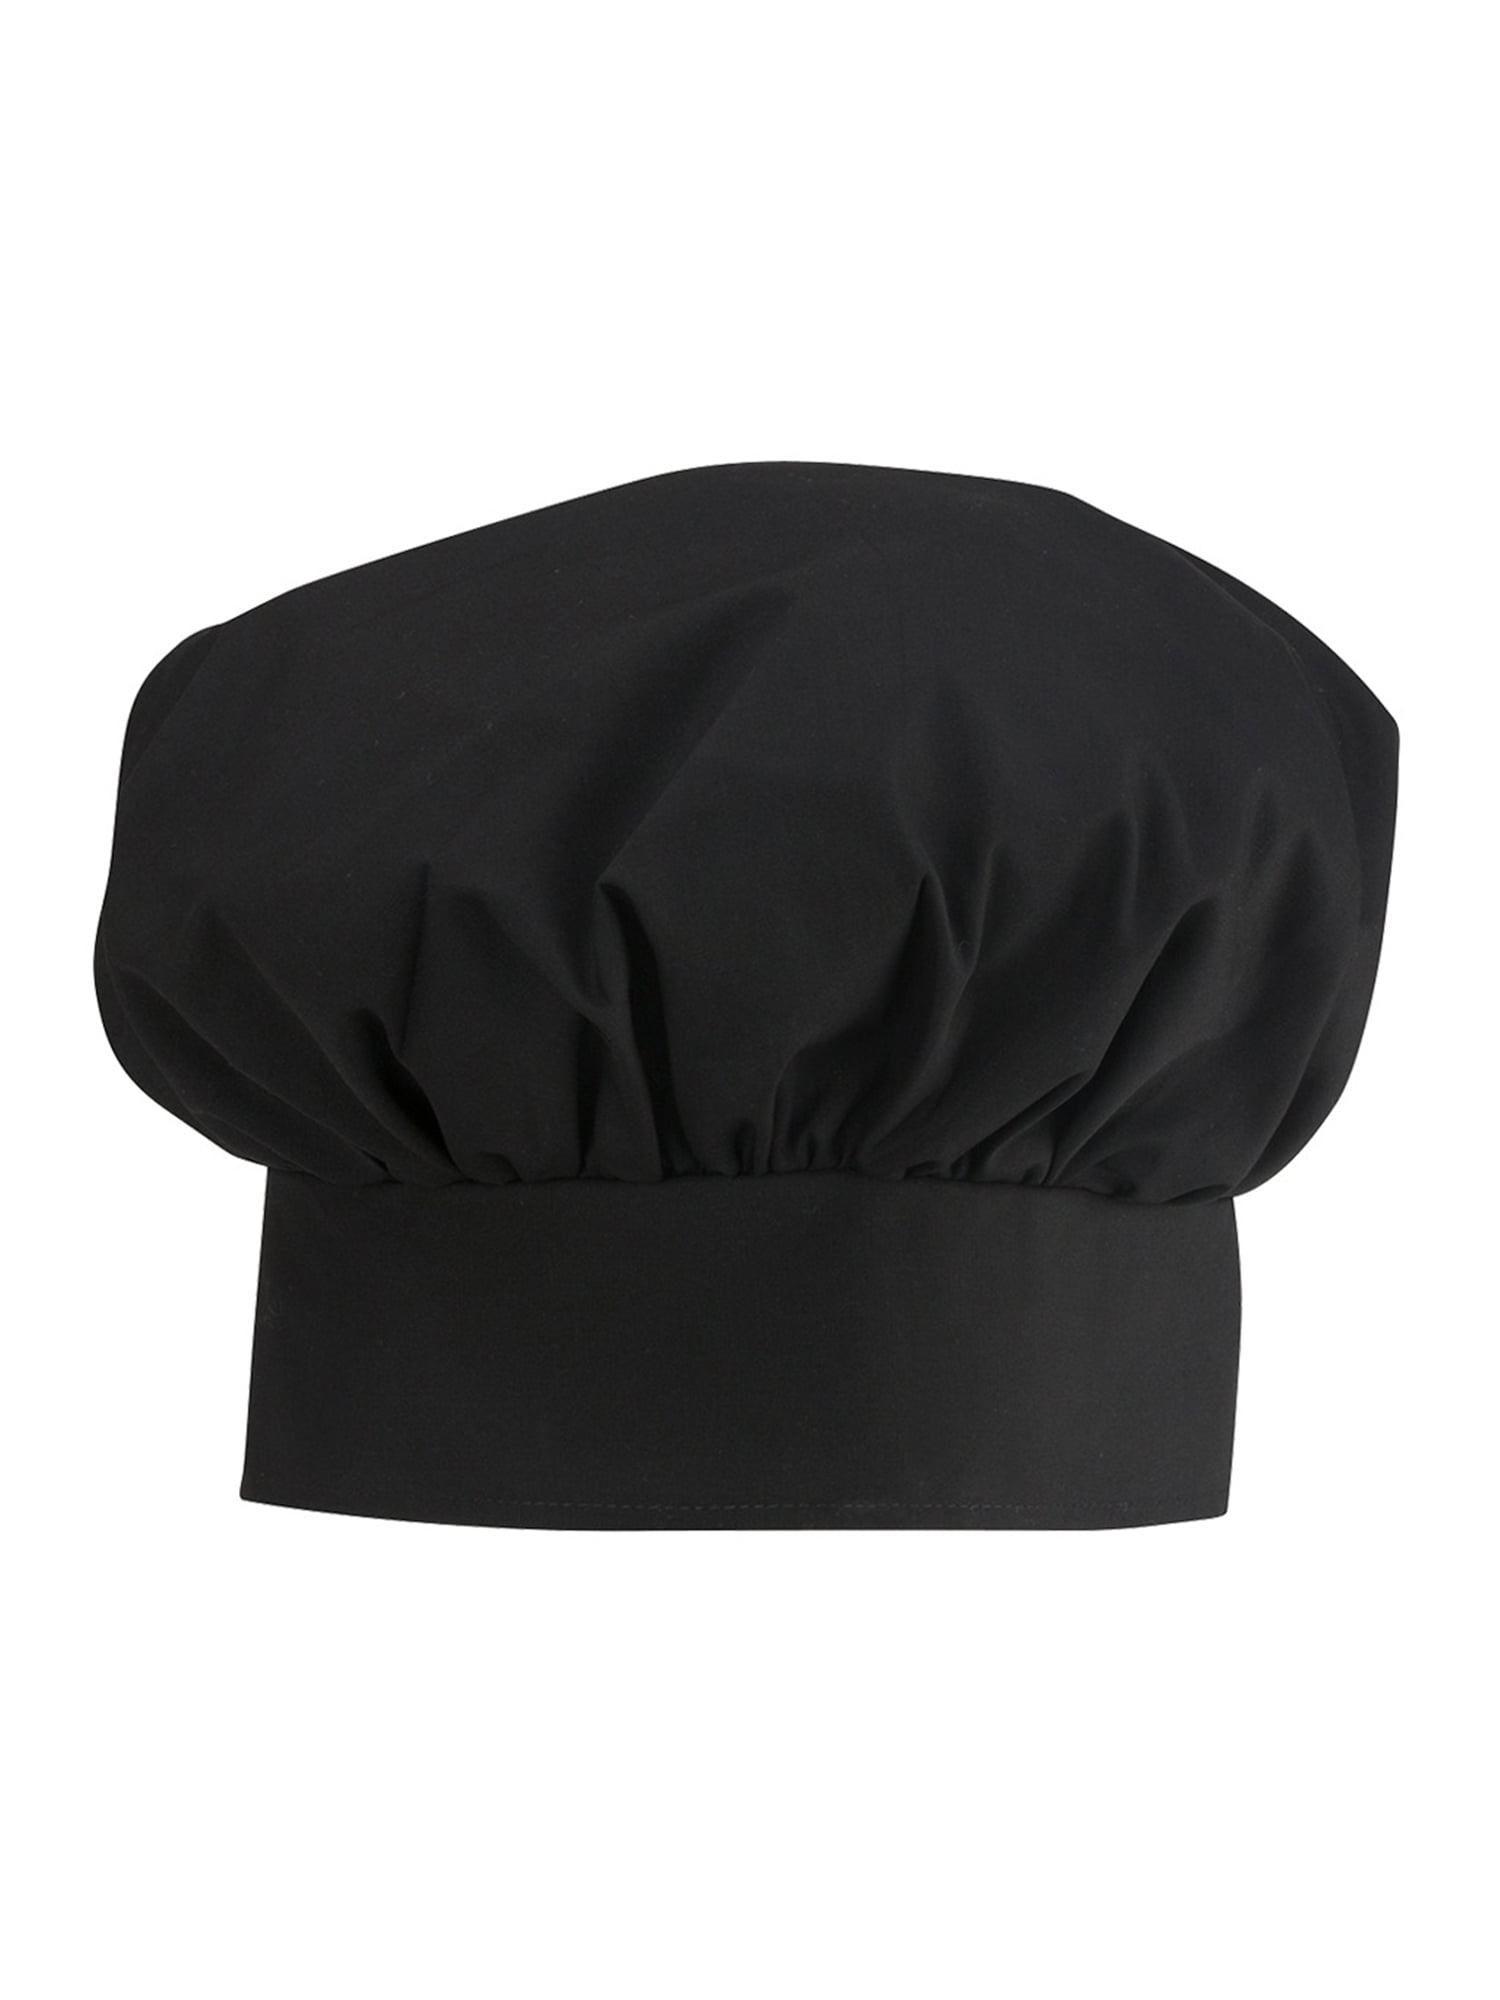 Details about   Chef Hat/Skull Cap Professional Catering Chef's CAP perfect in kitchen cleaning 